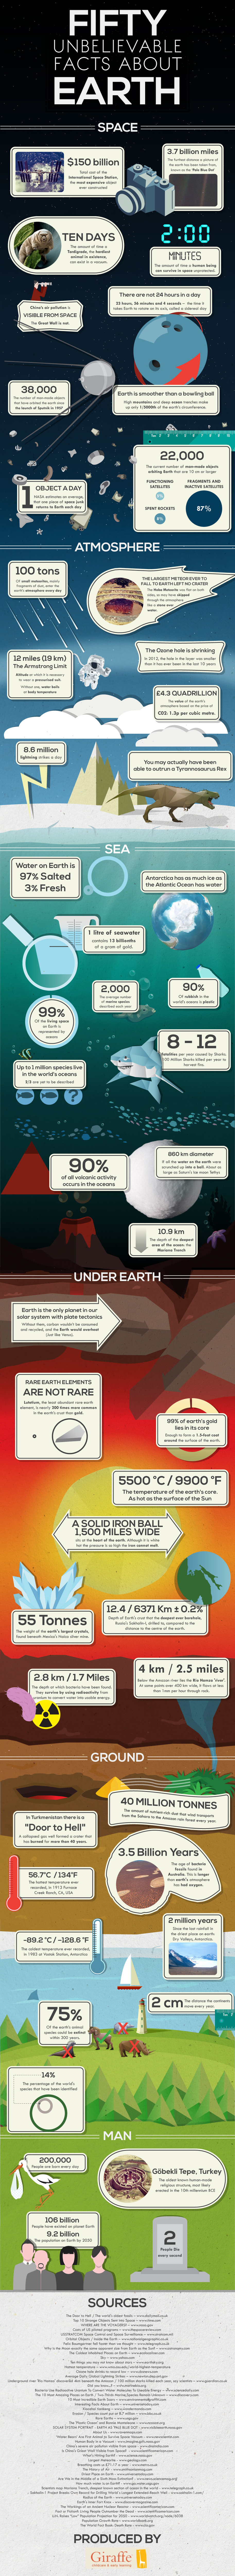 Fifty Unbelievable Facts About Earth - Infographic